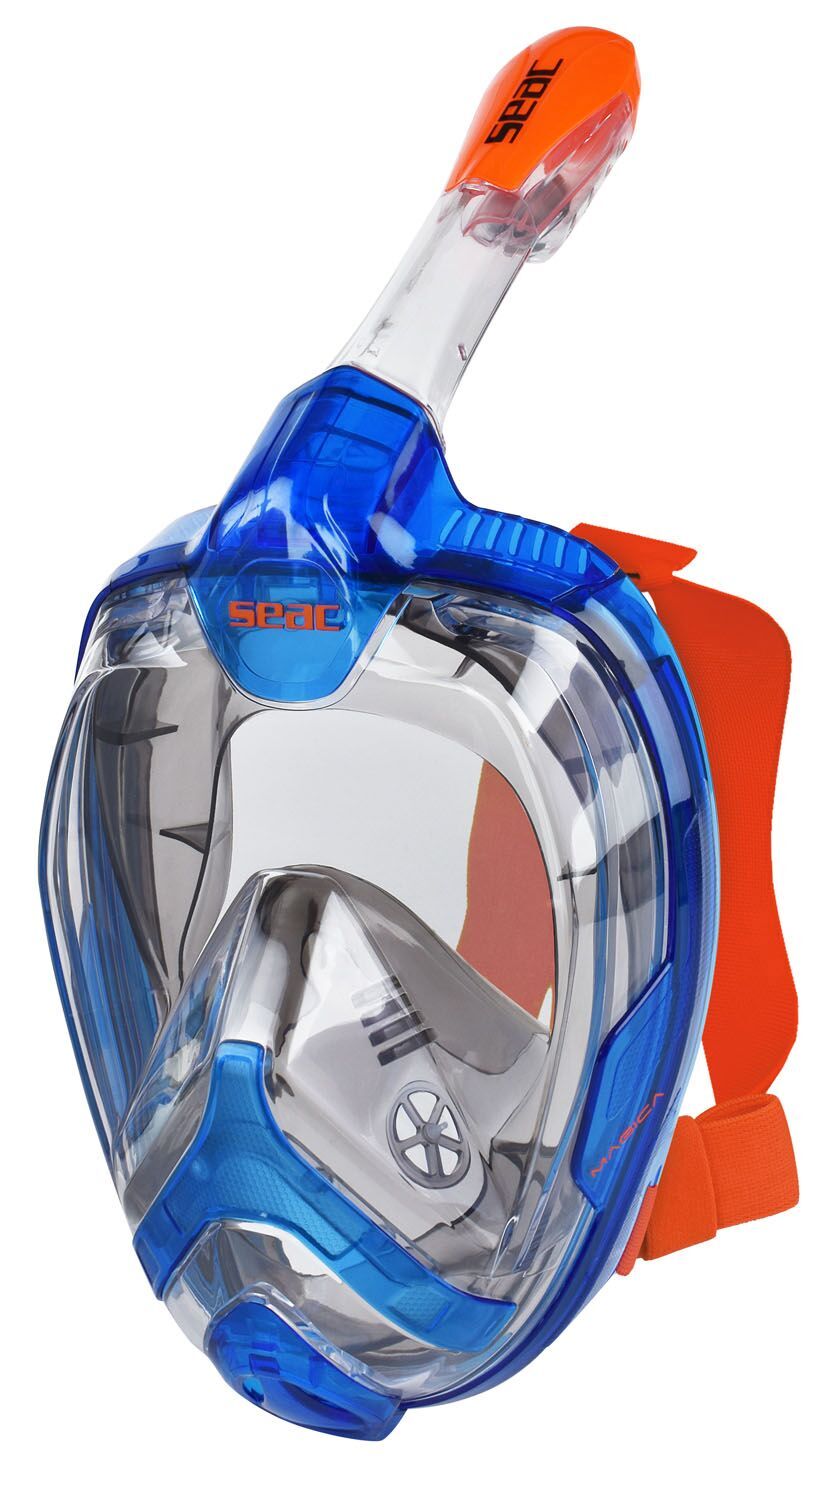 Seac Sub Magica Snorkeling Mask - XL in Blue